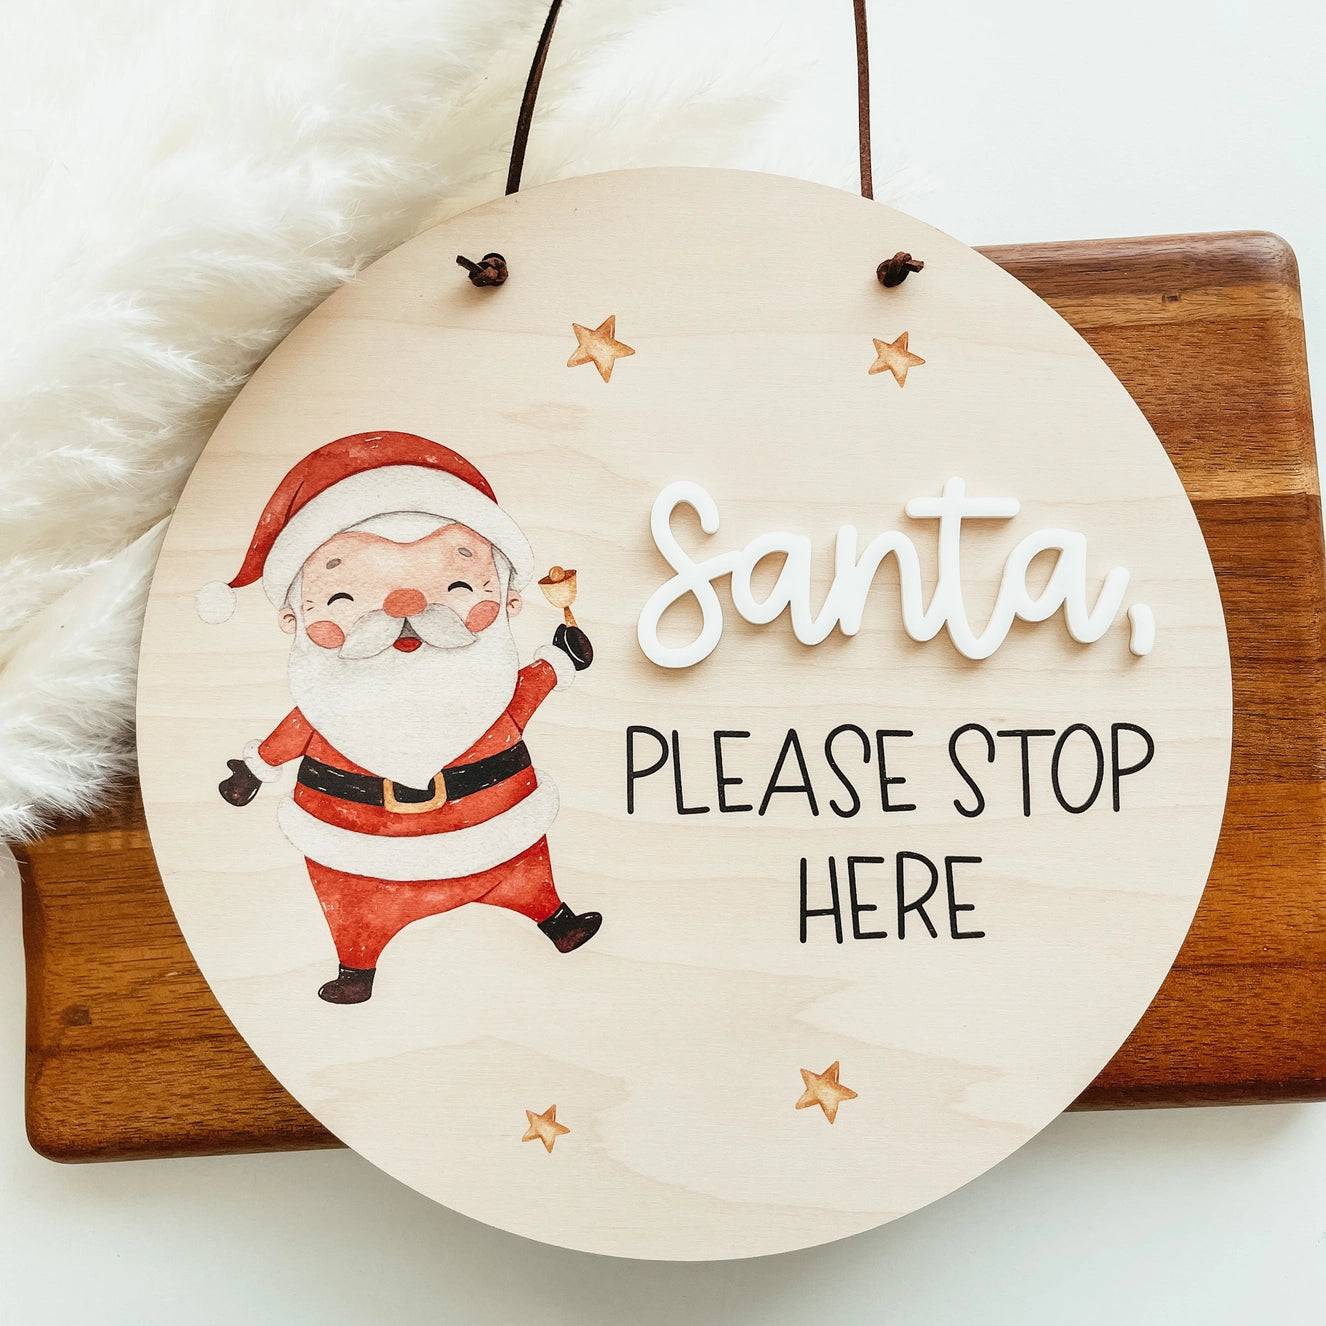 Santa Please Stop Here Mini Sign (SALE) - The Local Space